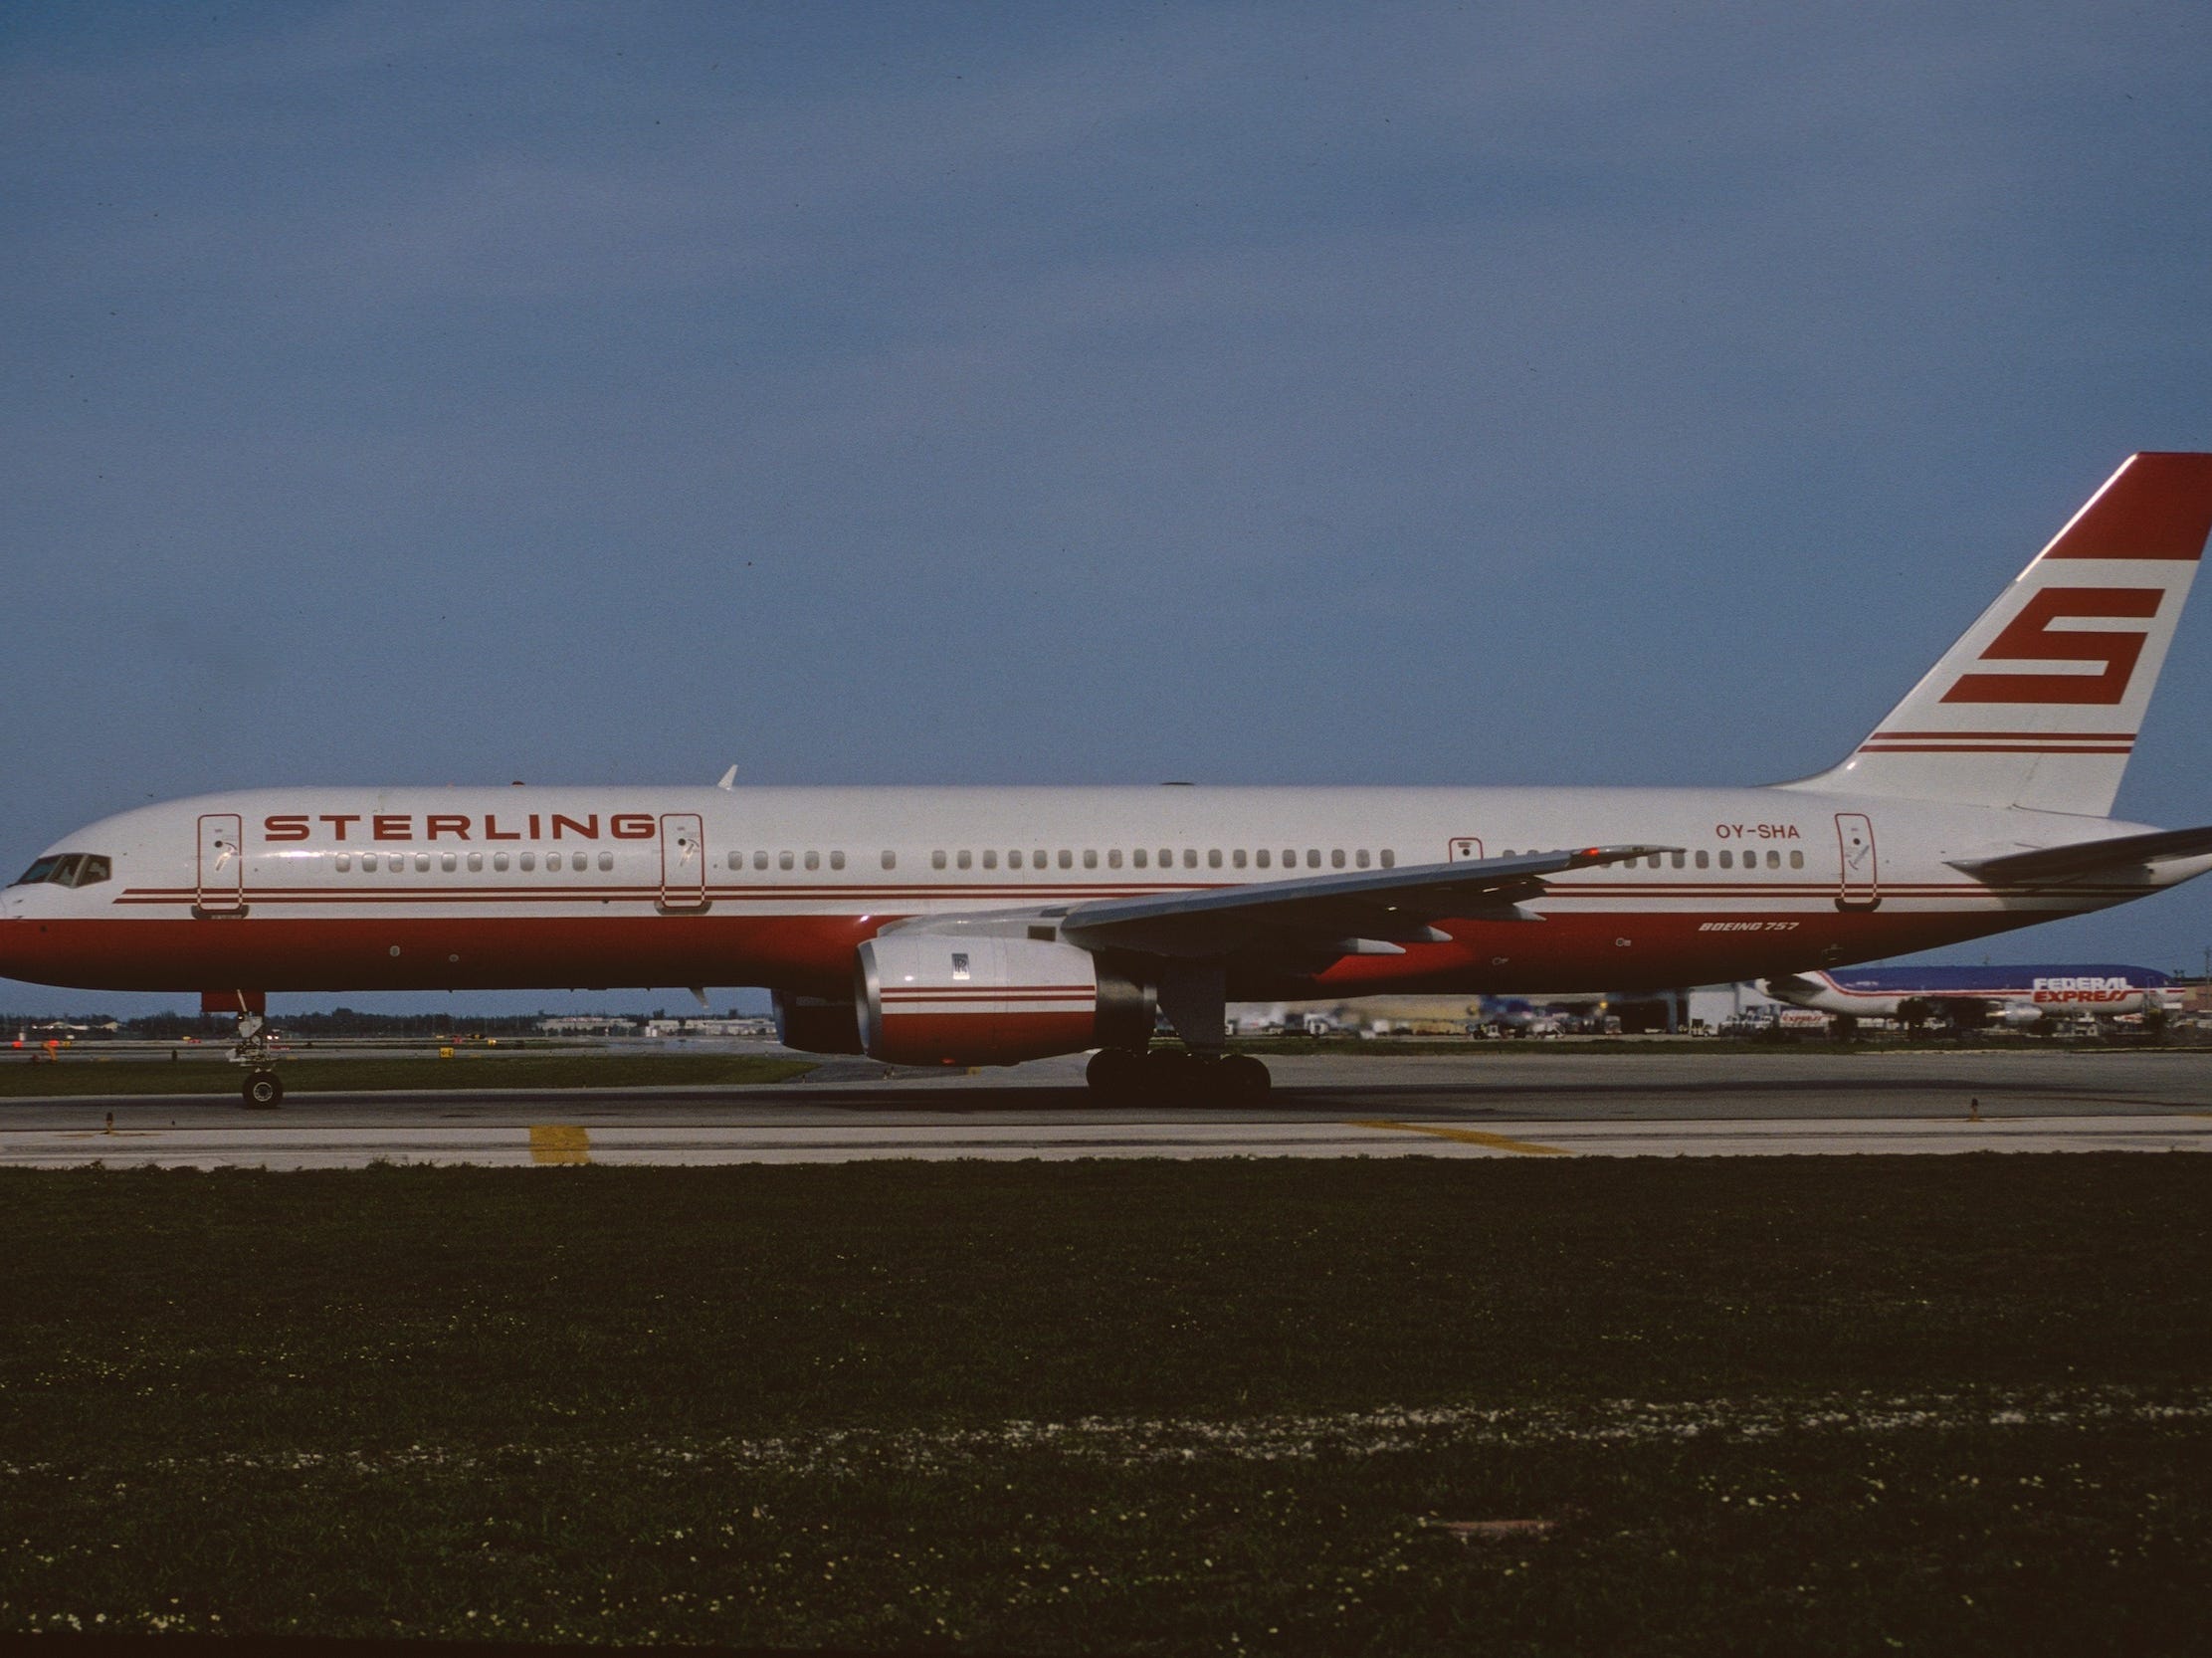 Trump's 757 when it flew for Sterling Airlines.